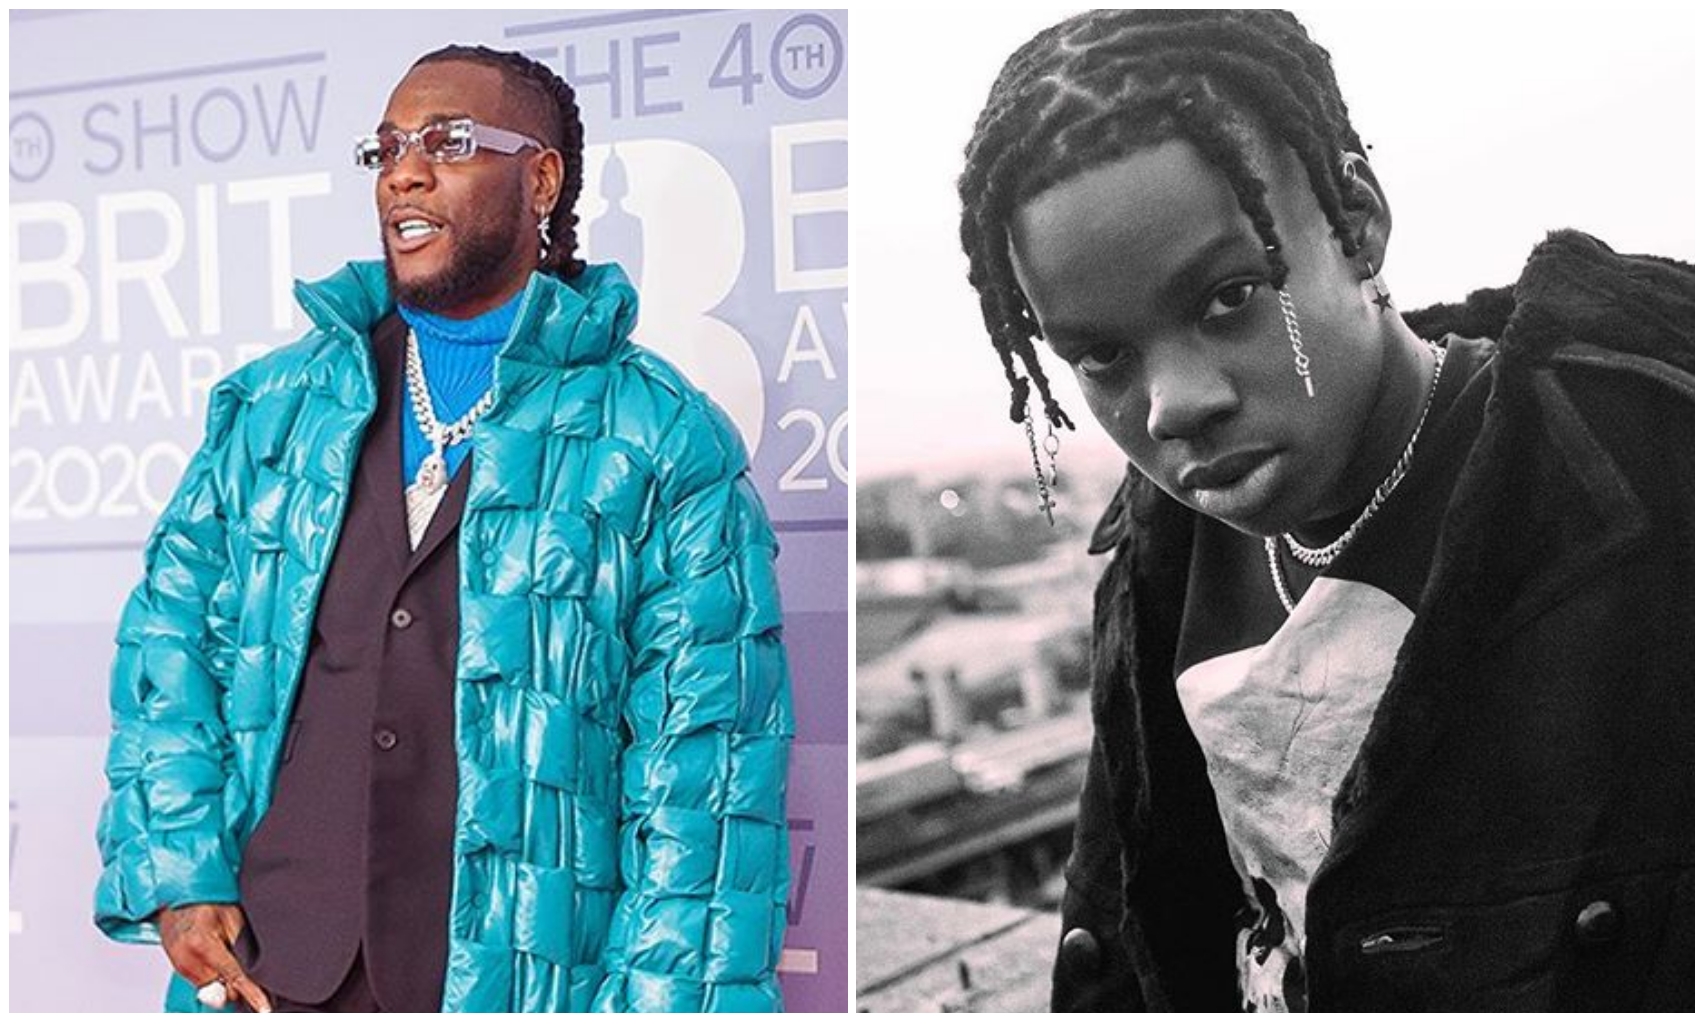 Burna Boy and Rema nominated for 2020 BET Awards (Full List)